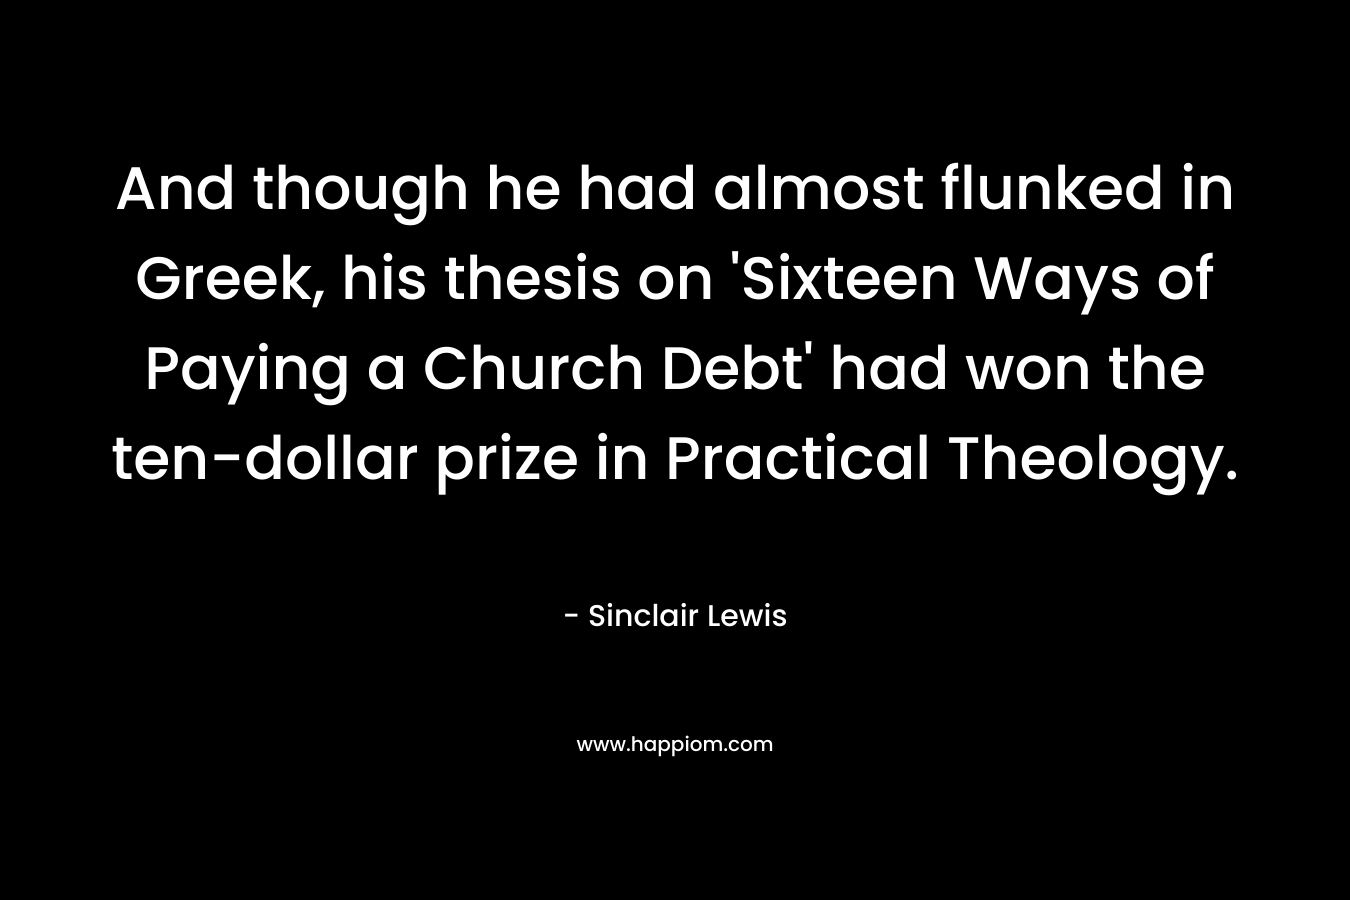 And though he had almost flunked in Greek, his thesis on 'Sixteen Ways of Paying a Church Debt' had won the ten-dollar prize in Practical Theology.